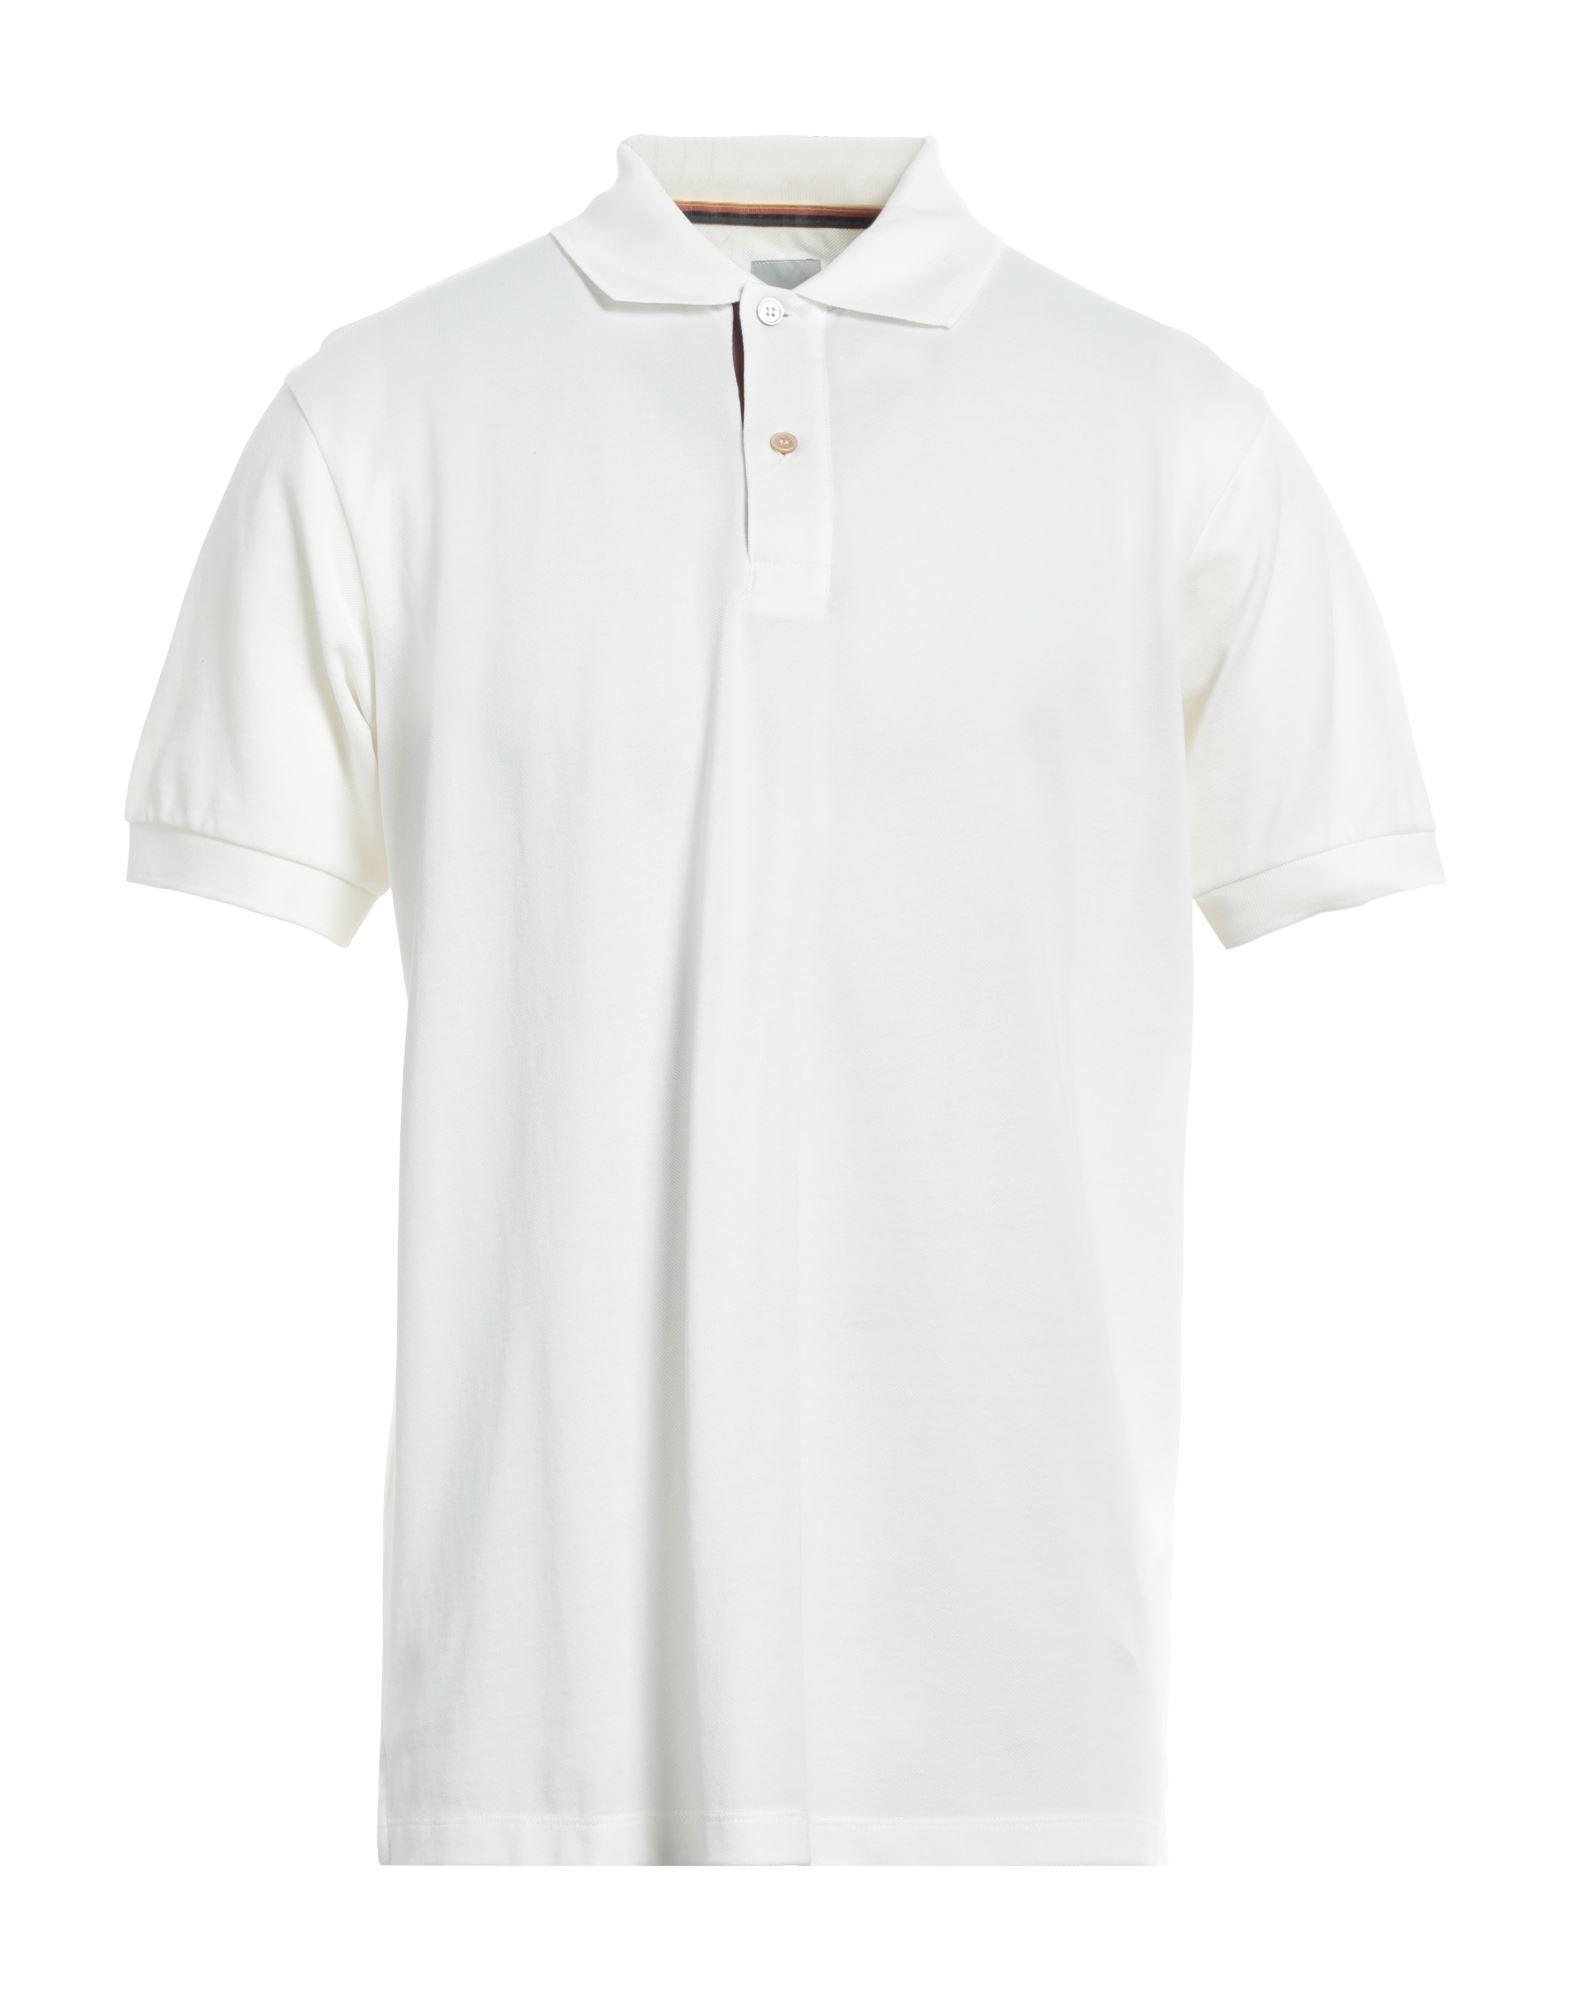 Paul Smith Polo Shirt in White for Men | Lyst